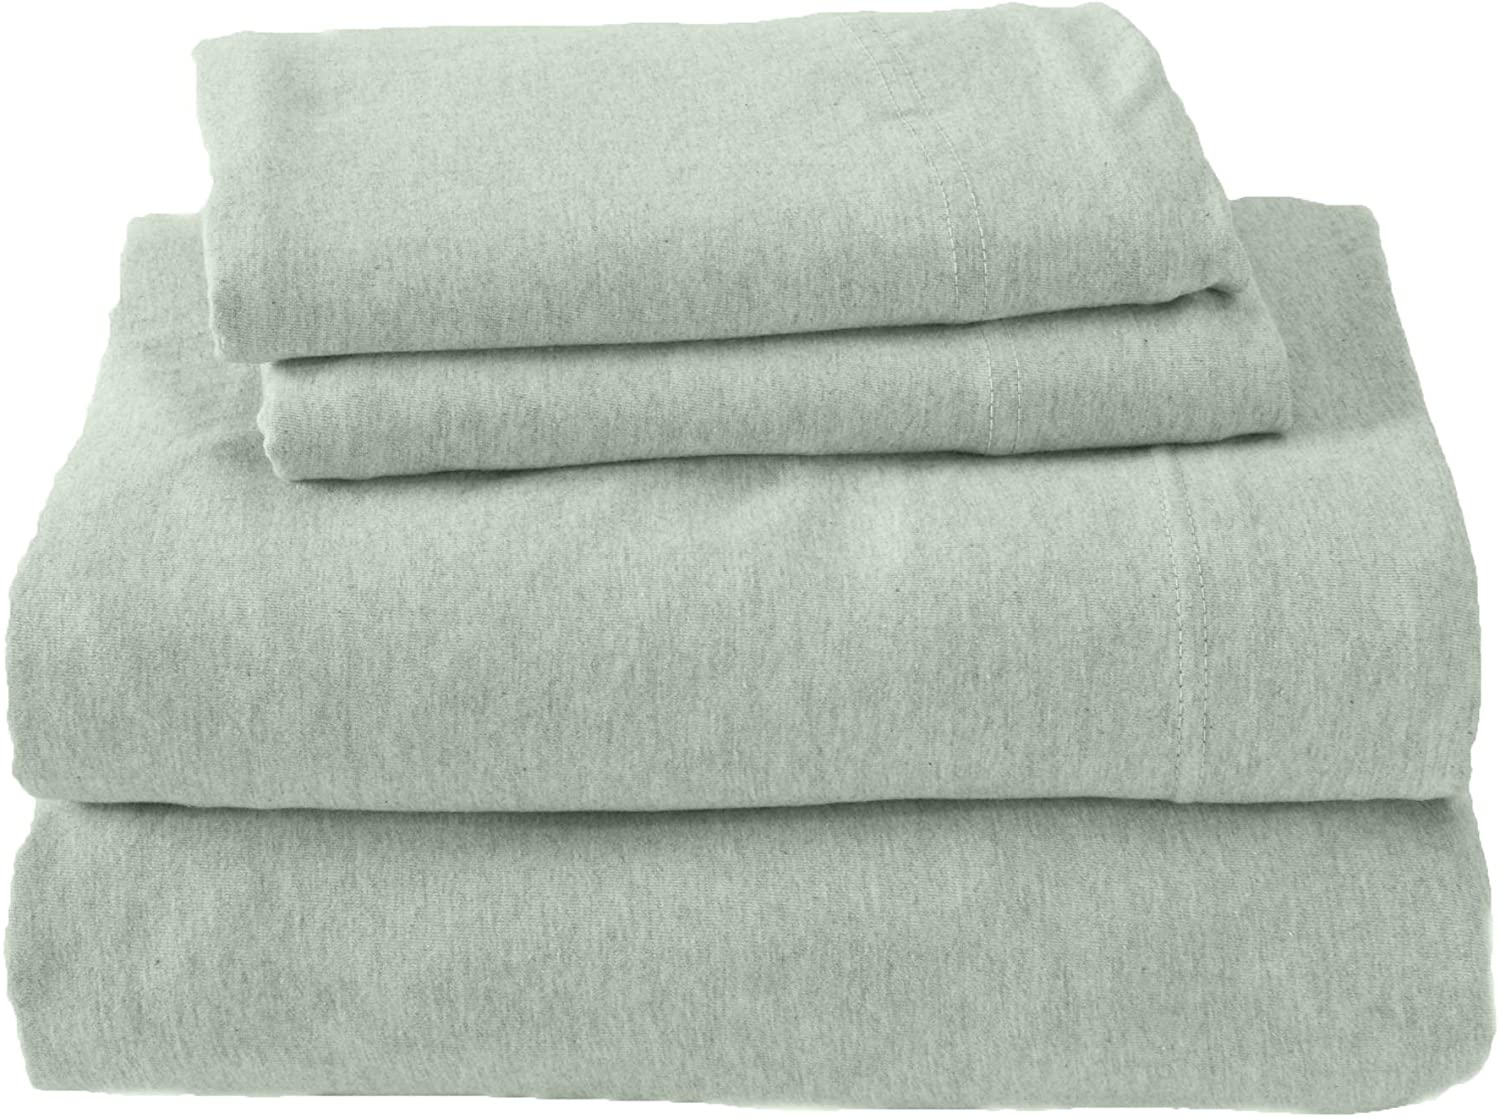 Jersey Knit Sheets. All Season, Soft, Cozy Queen Jersey Sheets. T 